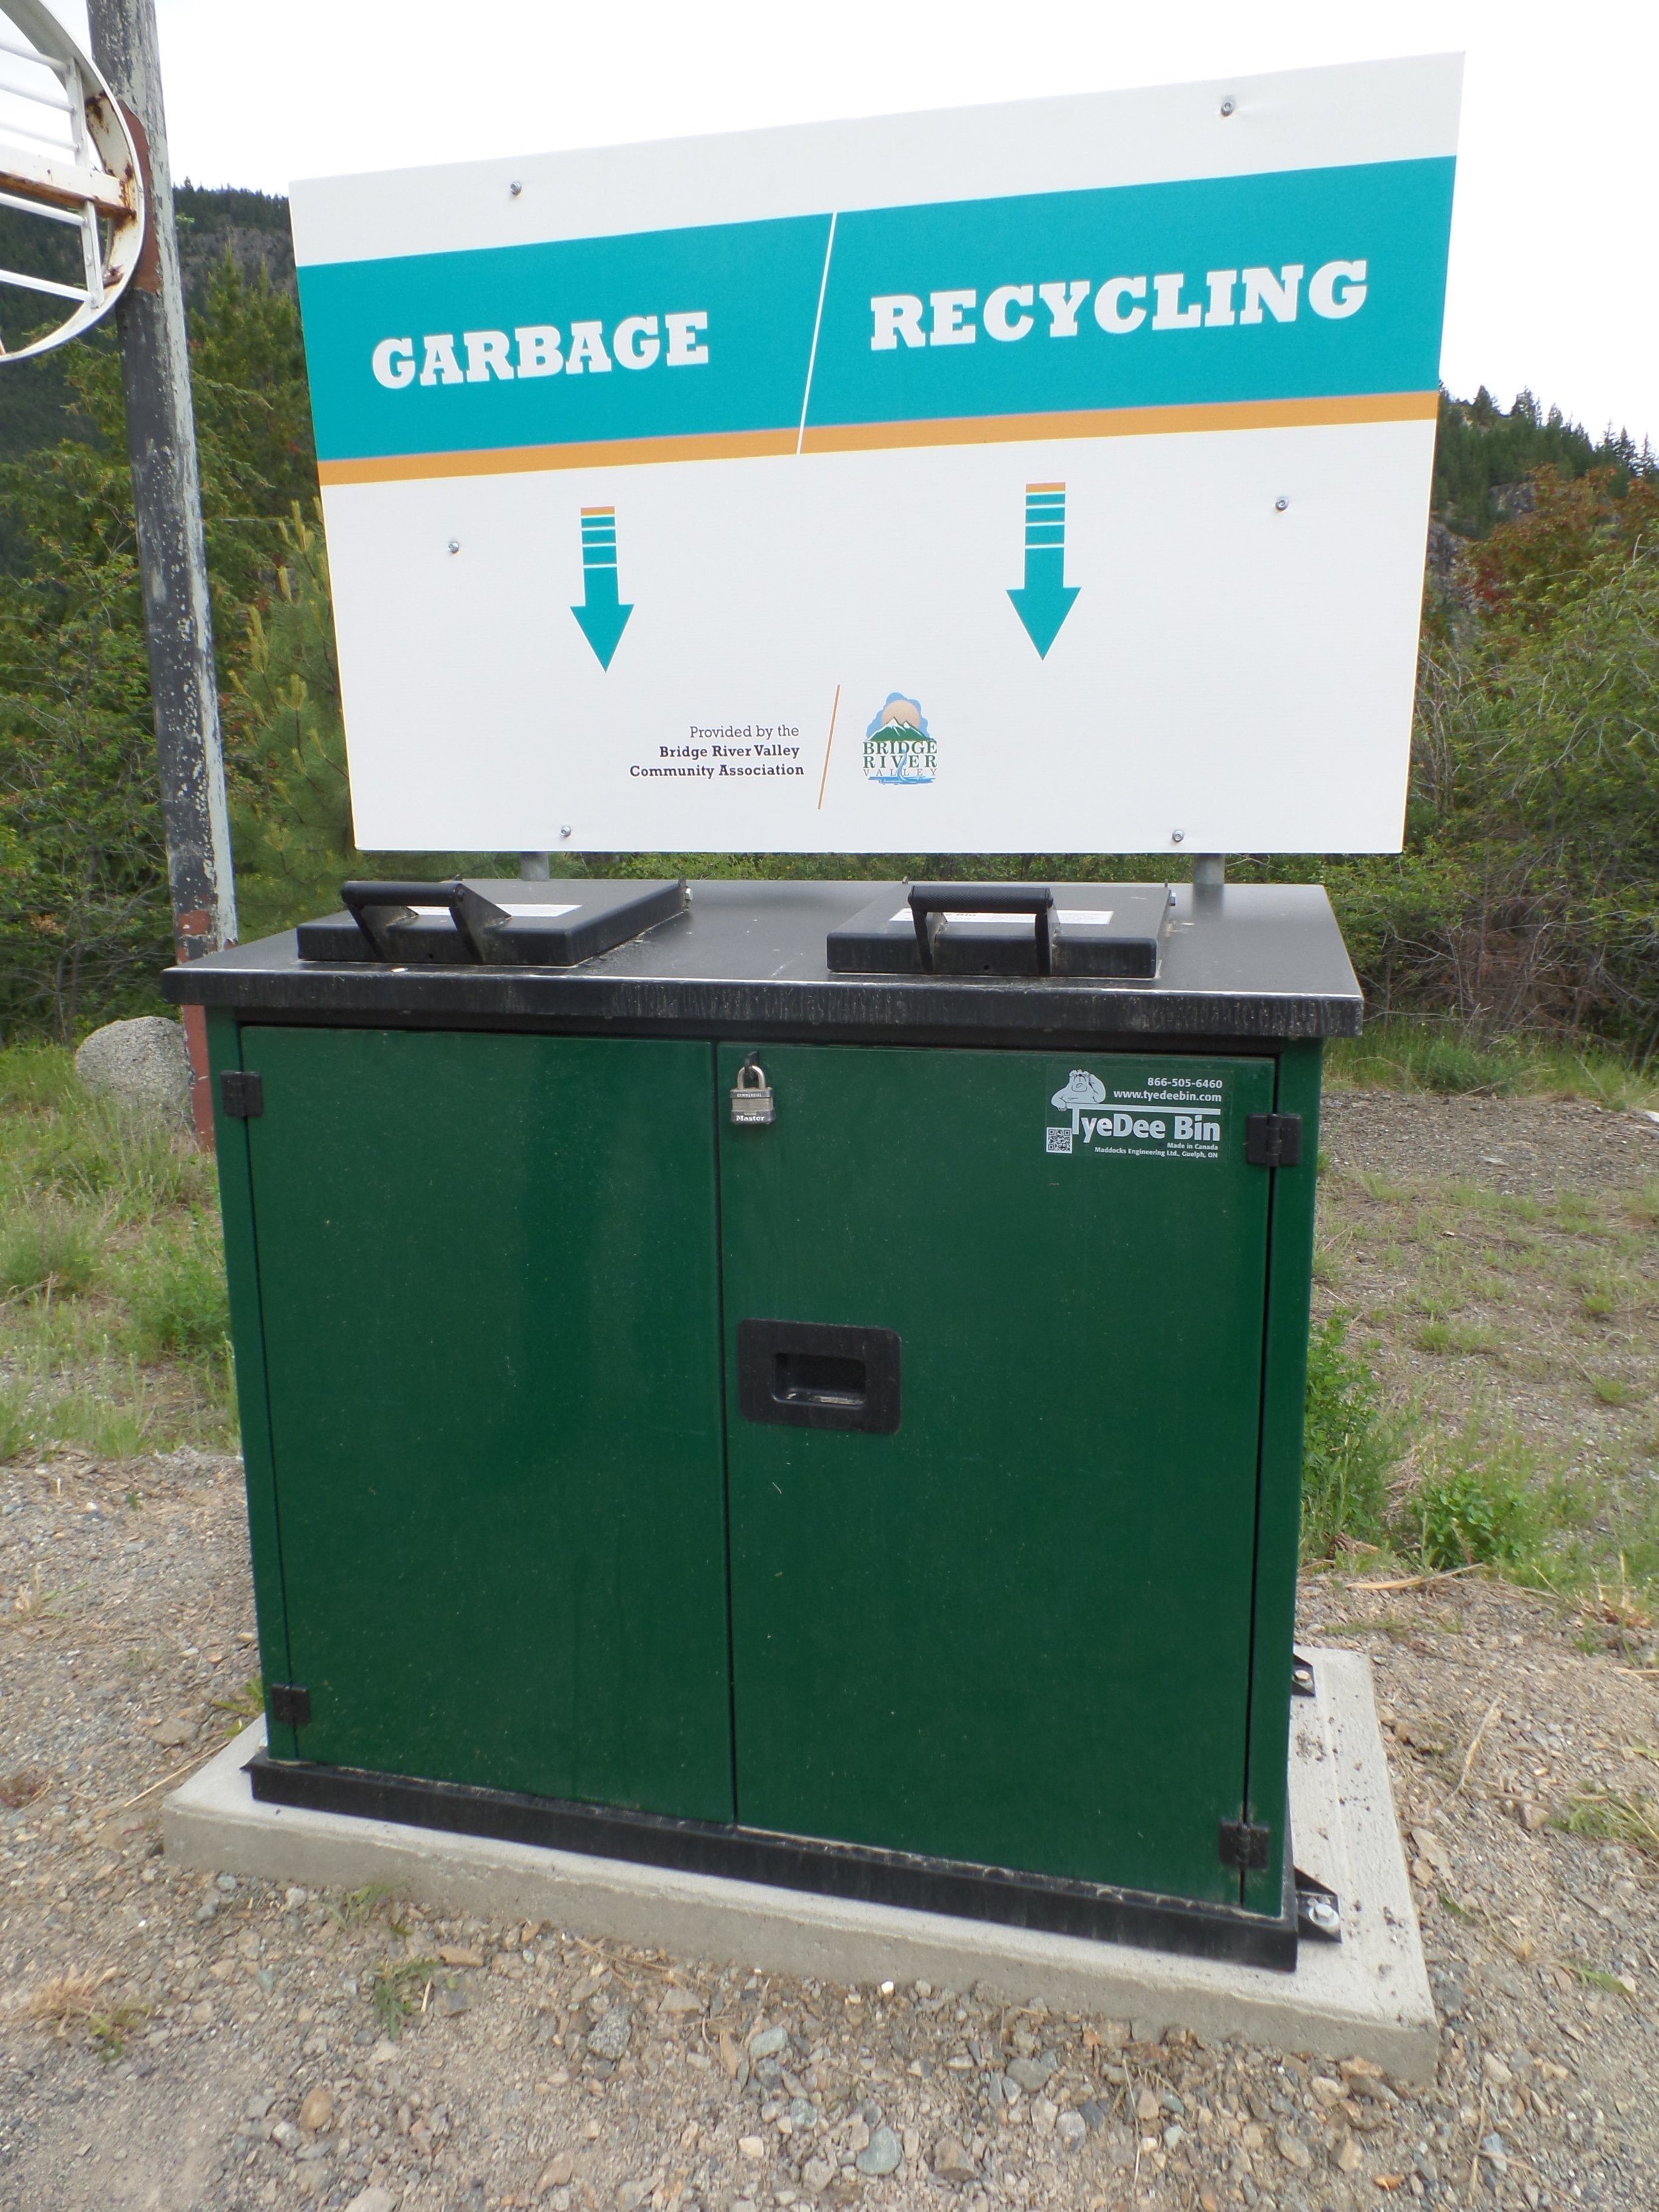  The BRV community had a bear-resistant garbage and recycling bin located in town. 